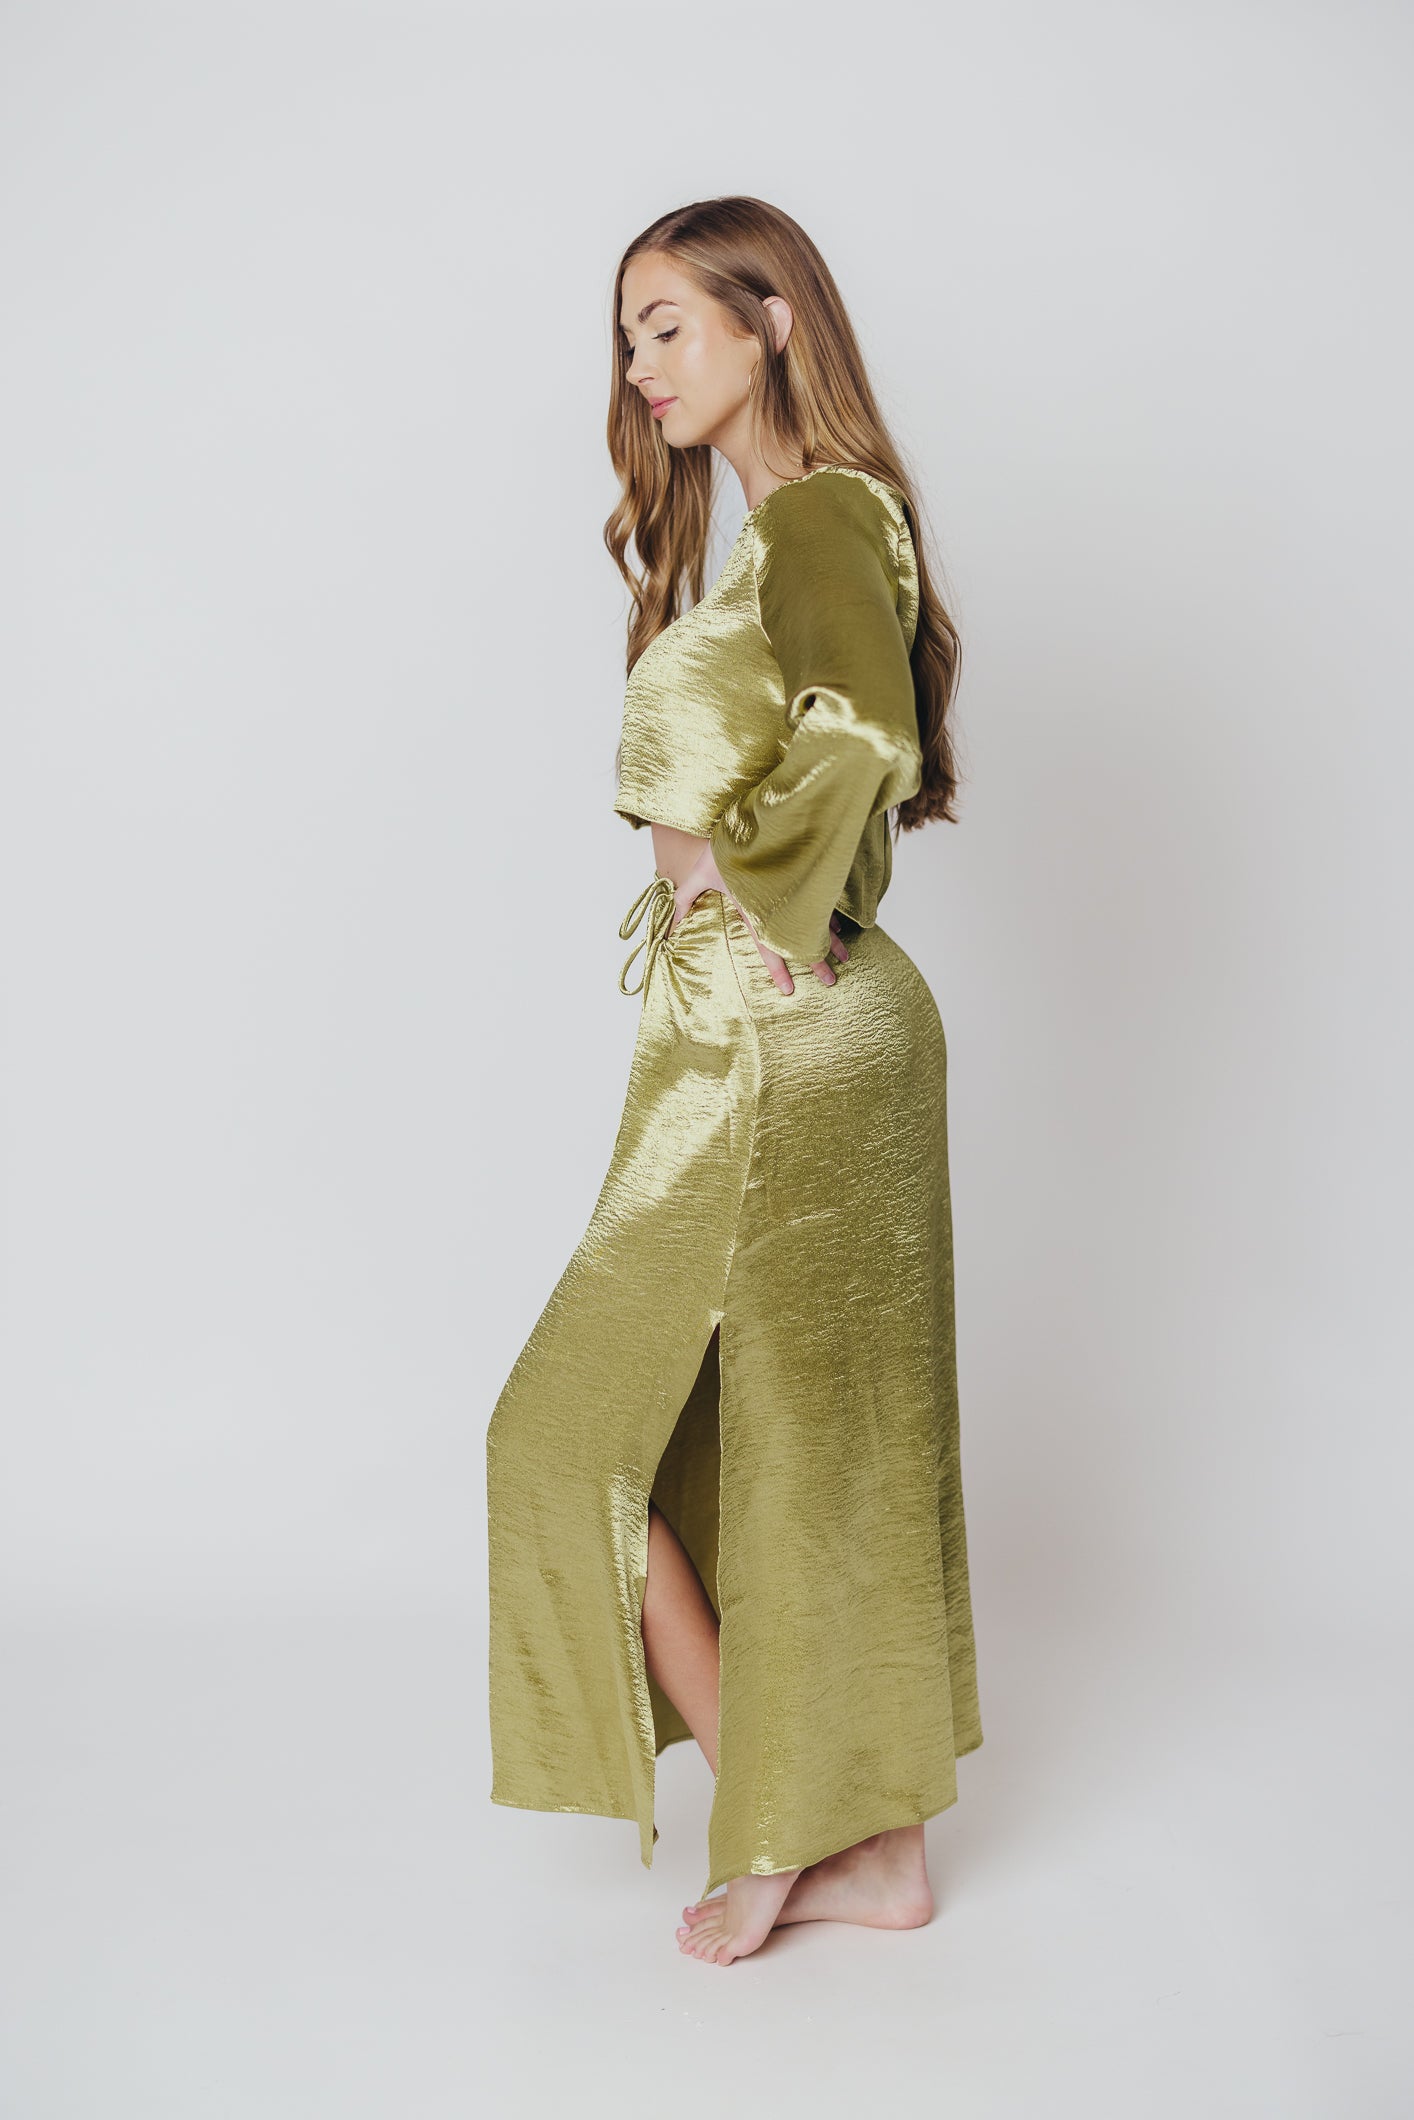 Cecily Top in Olive Gold